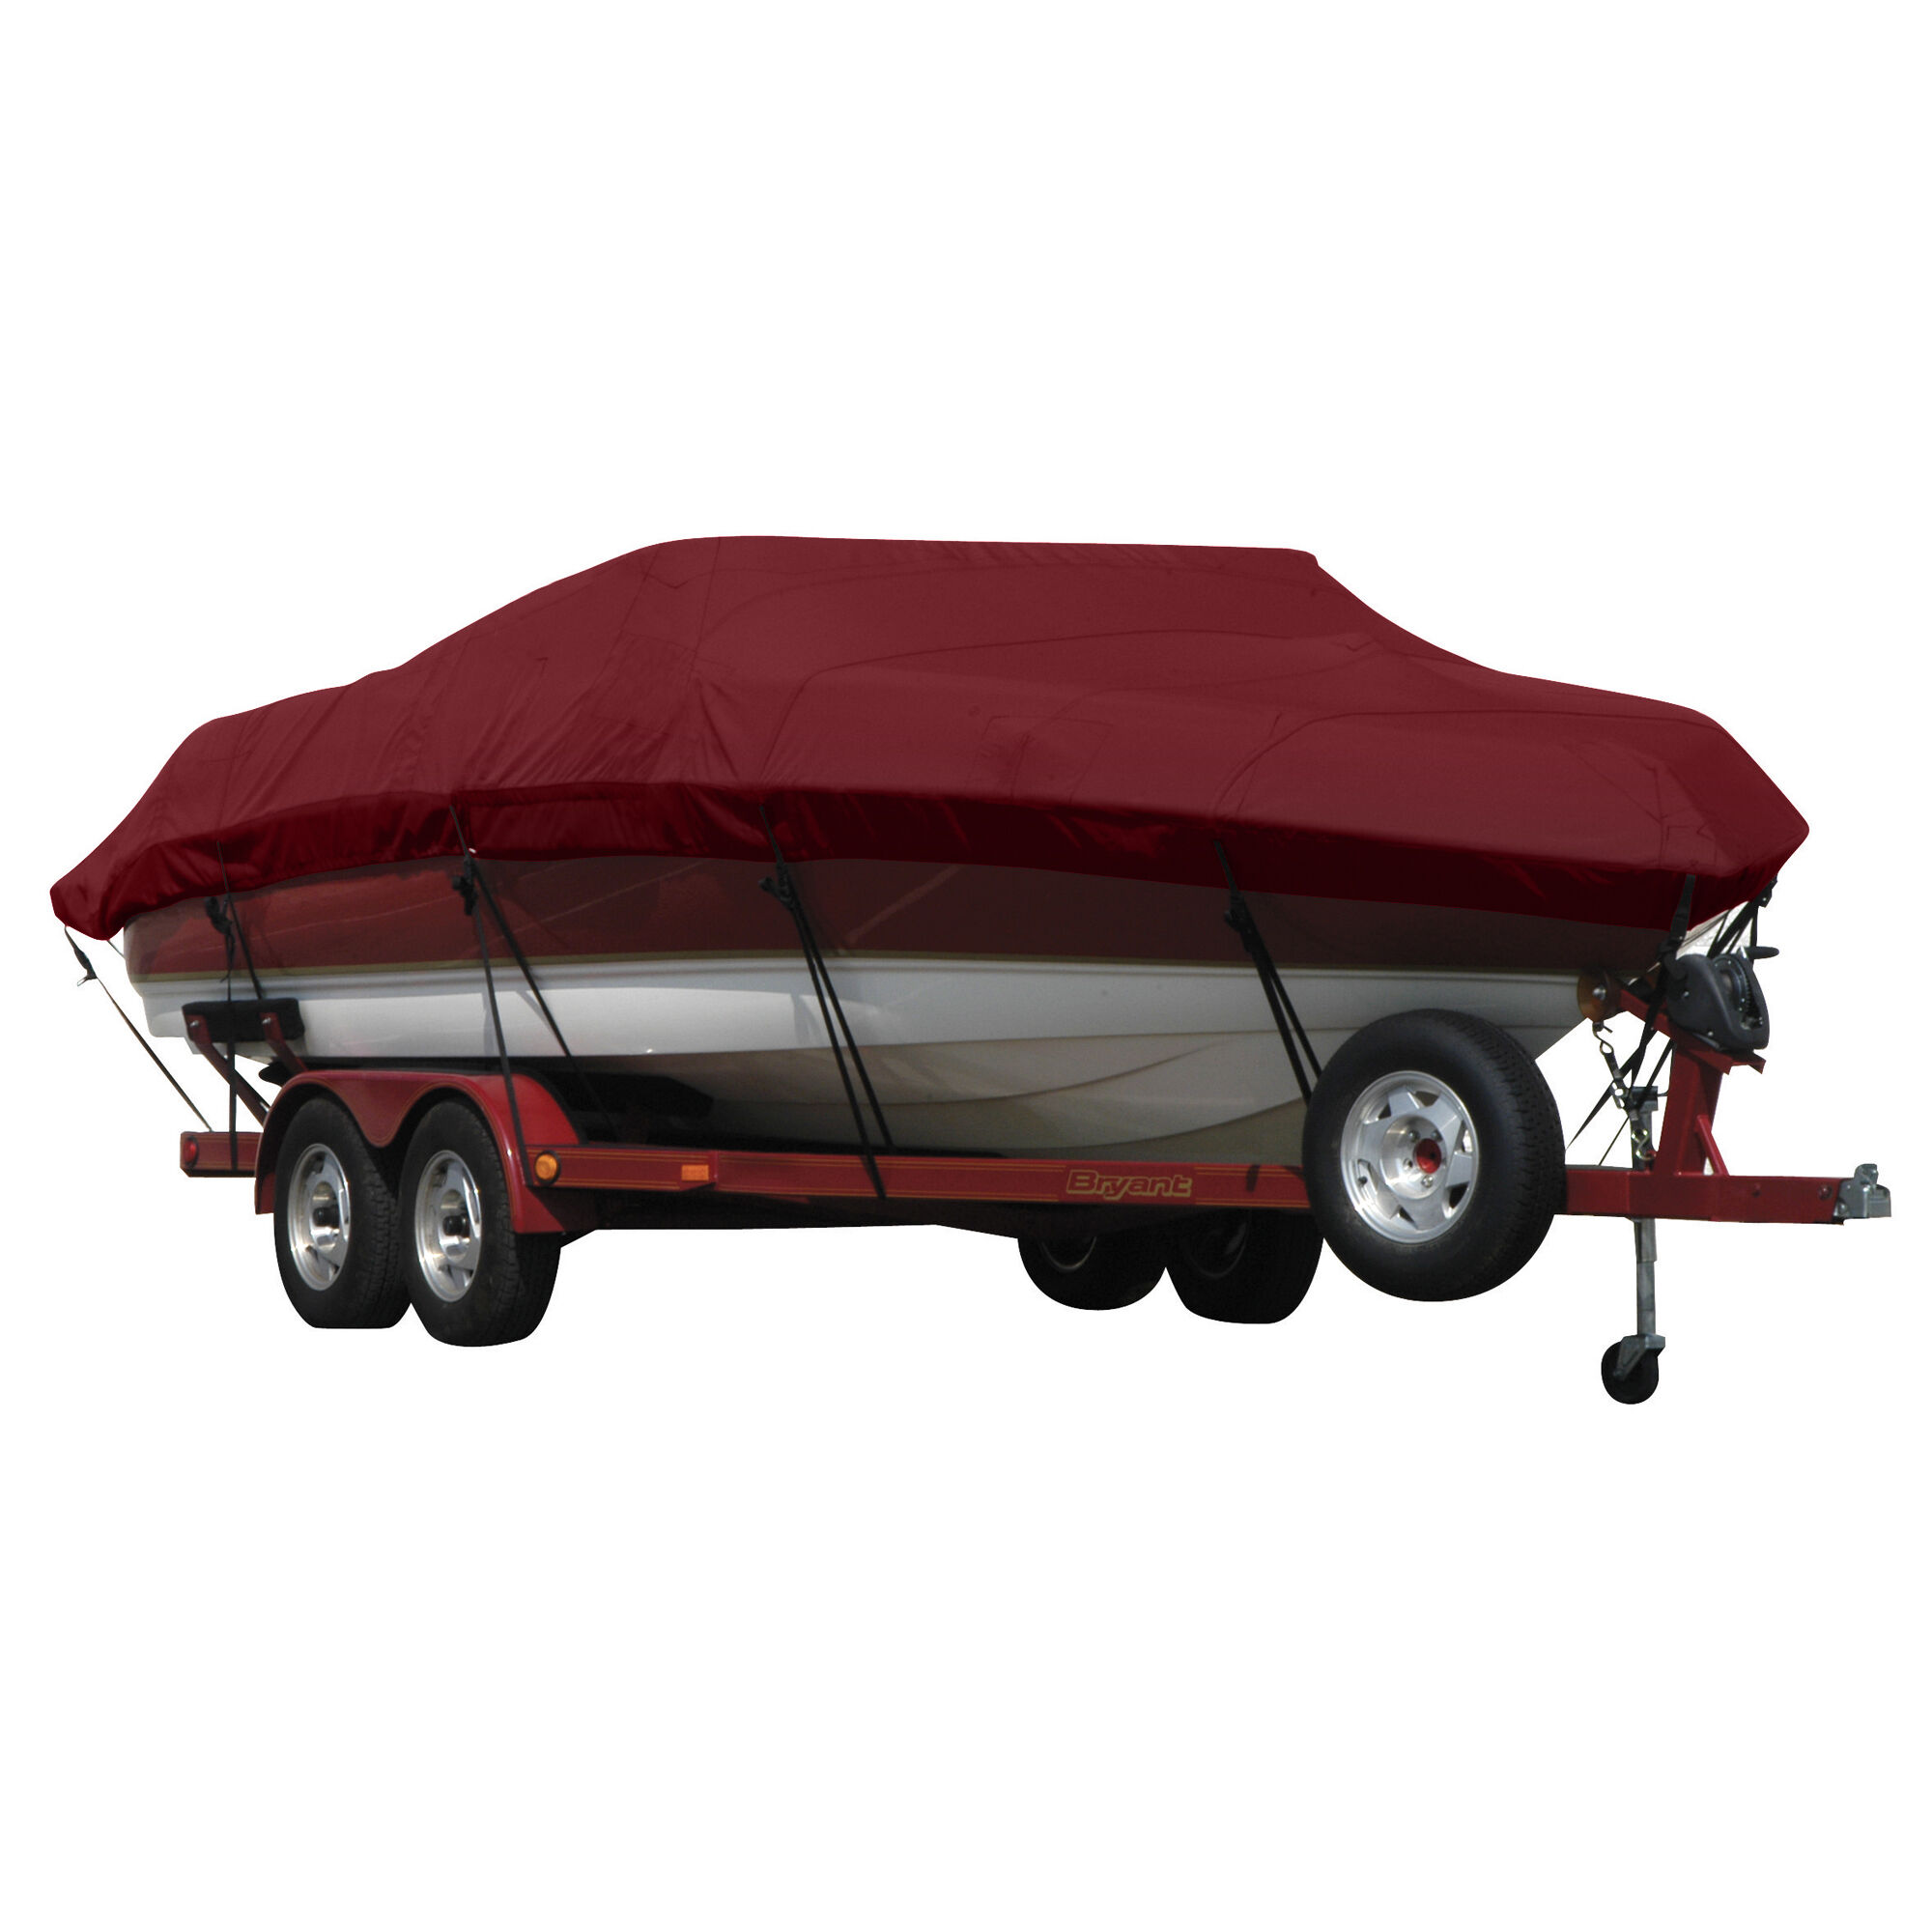 Covermate Exact Fit Sunbrella Boat Cover for Campion Chase 800 Chase 800 I/O. Burgundy